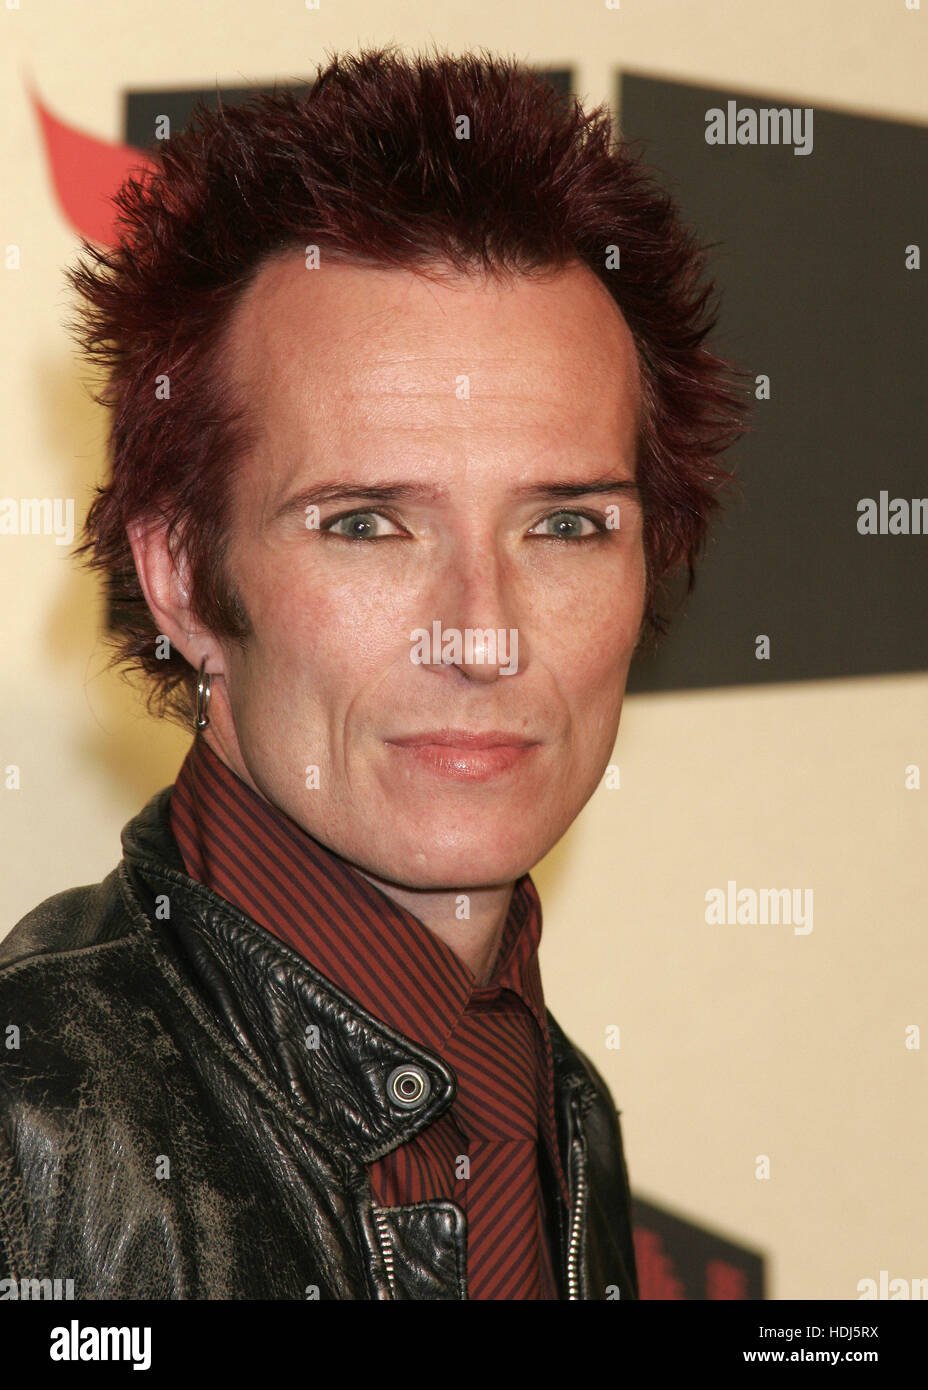 Scott Weiland at VH-1's Big in 2004 award show on December 1, 2004 in Los Angeles. Photo credit: Francis Specker Stock Photo